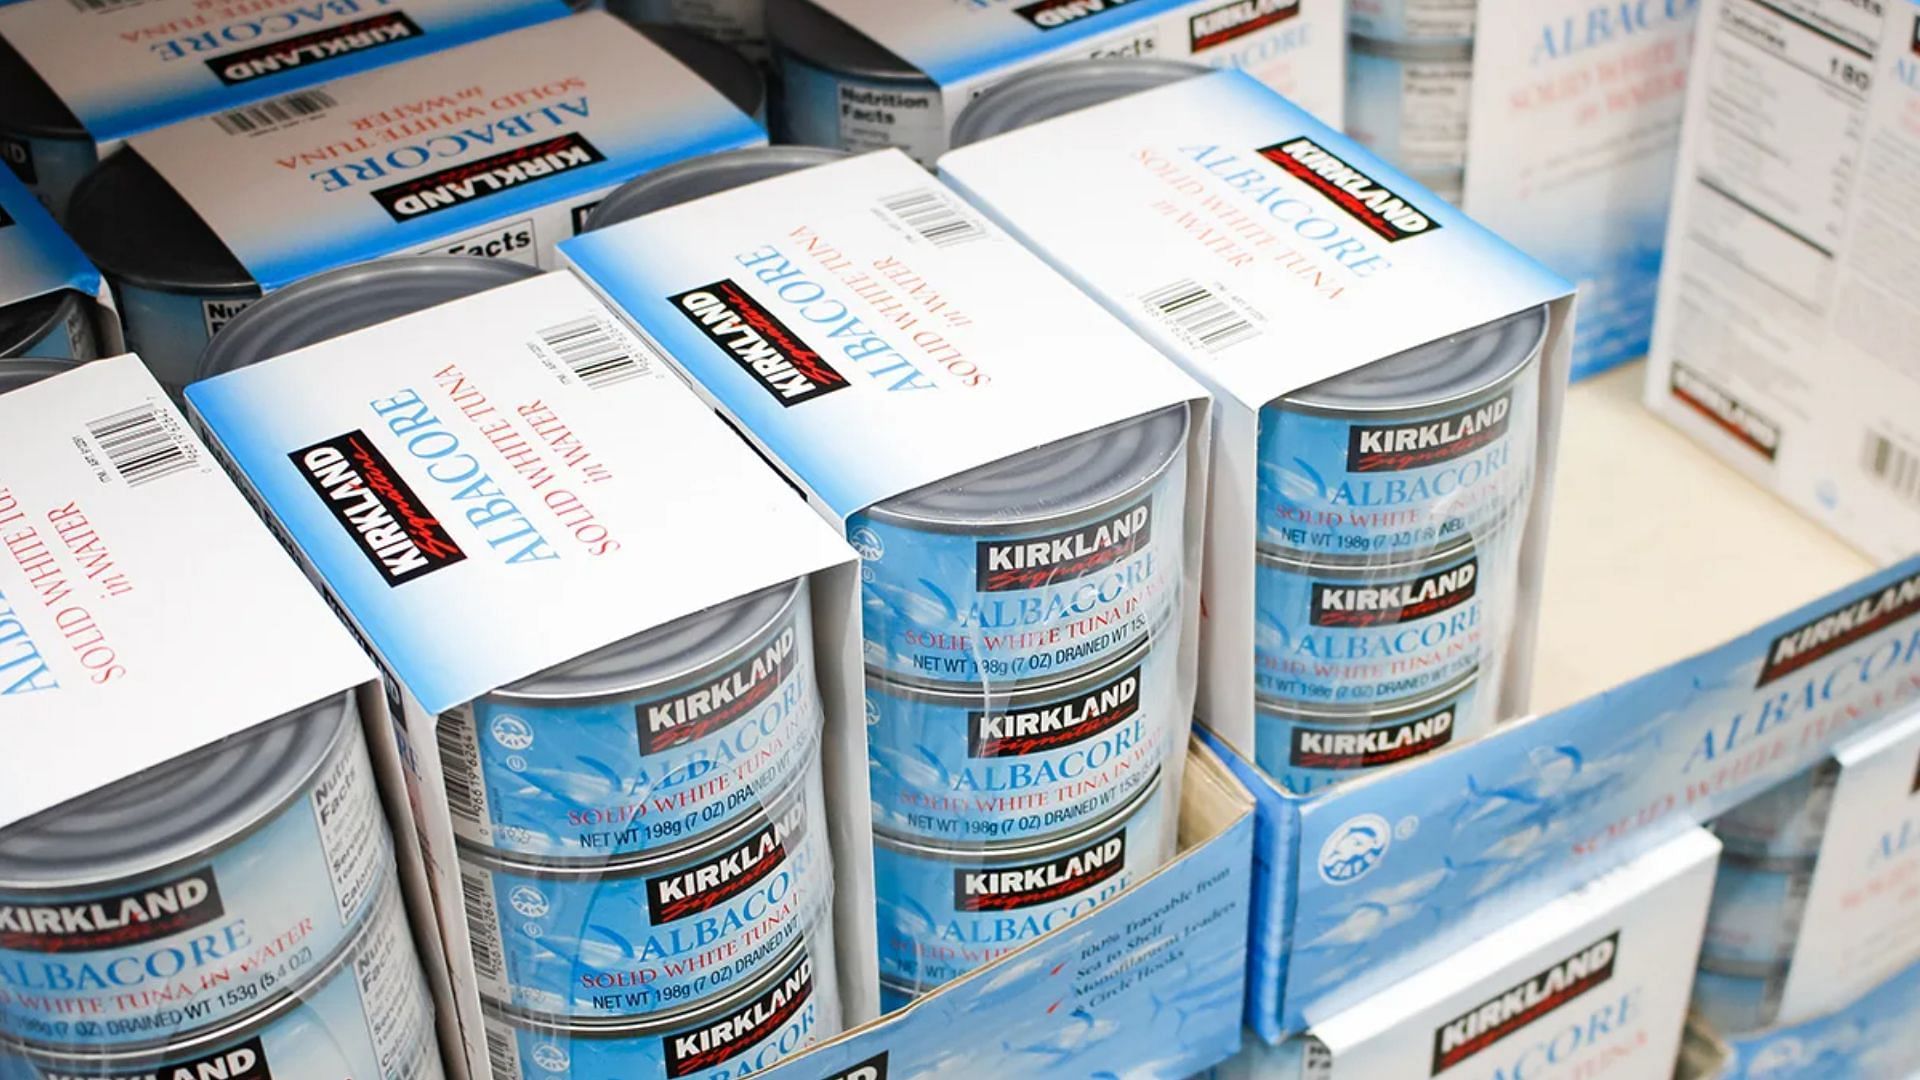 Cans of &#039;Kirkland Signature White Albacore In Water&#039; on a aisle in a Costco store (Image via The Image Party/Shutterstock)